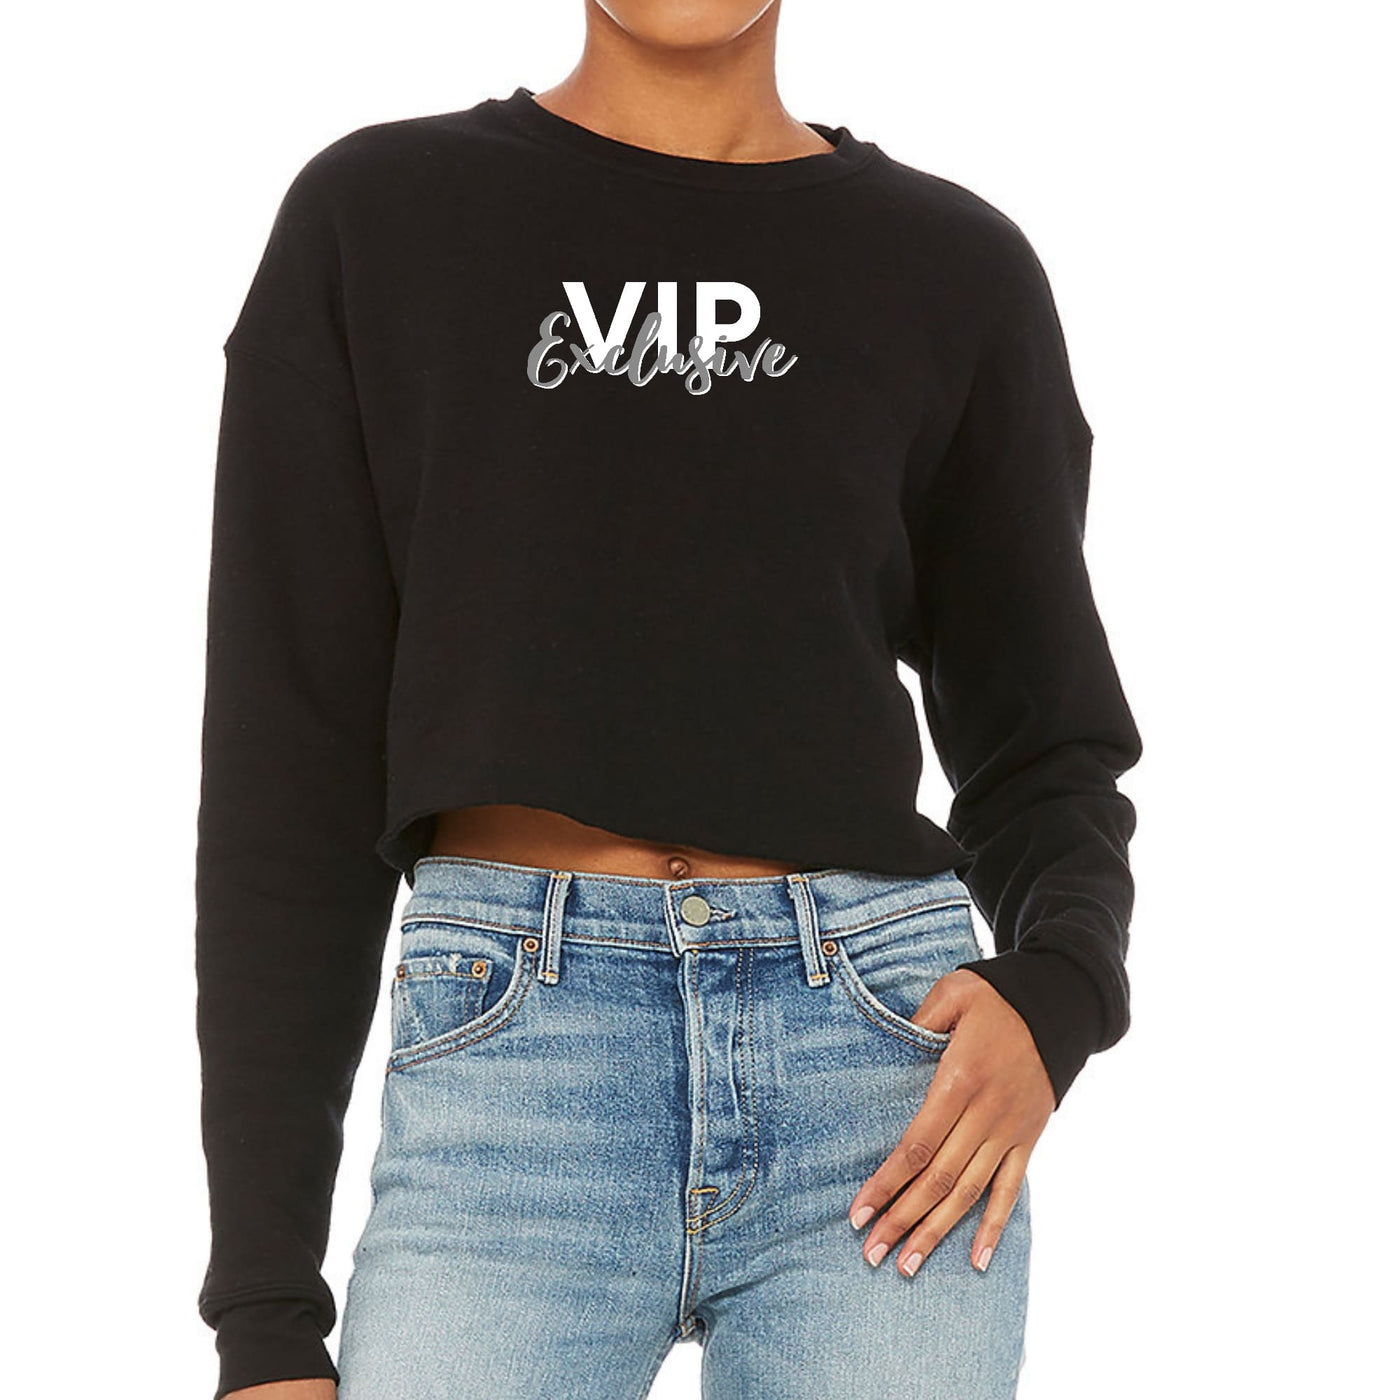 Womens Cropped Graphic Sweatshirt Vip Exclusive Grey And White - Womens